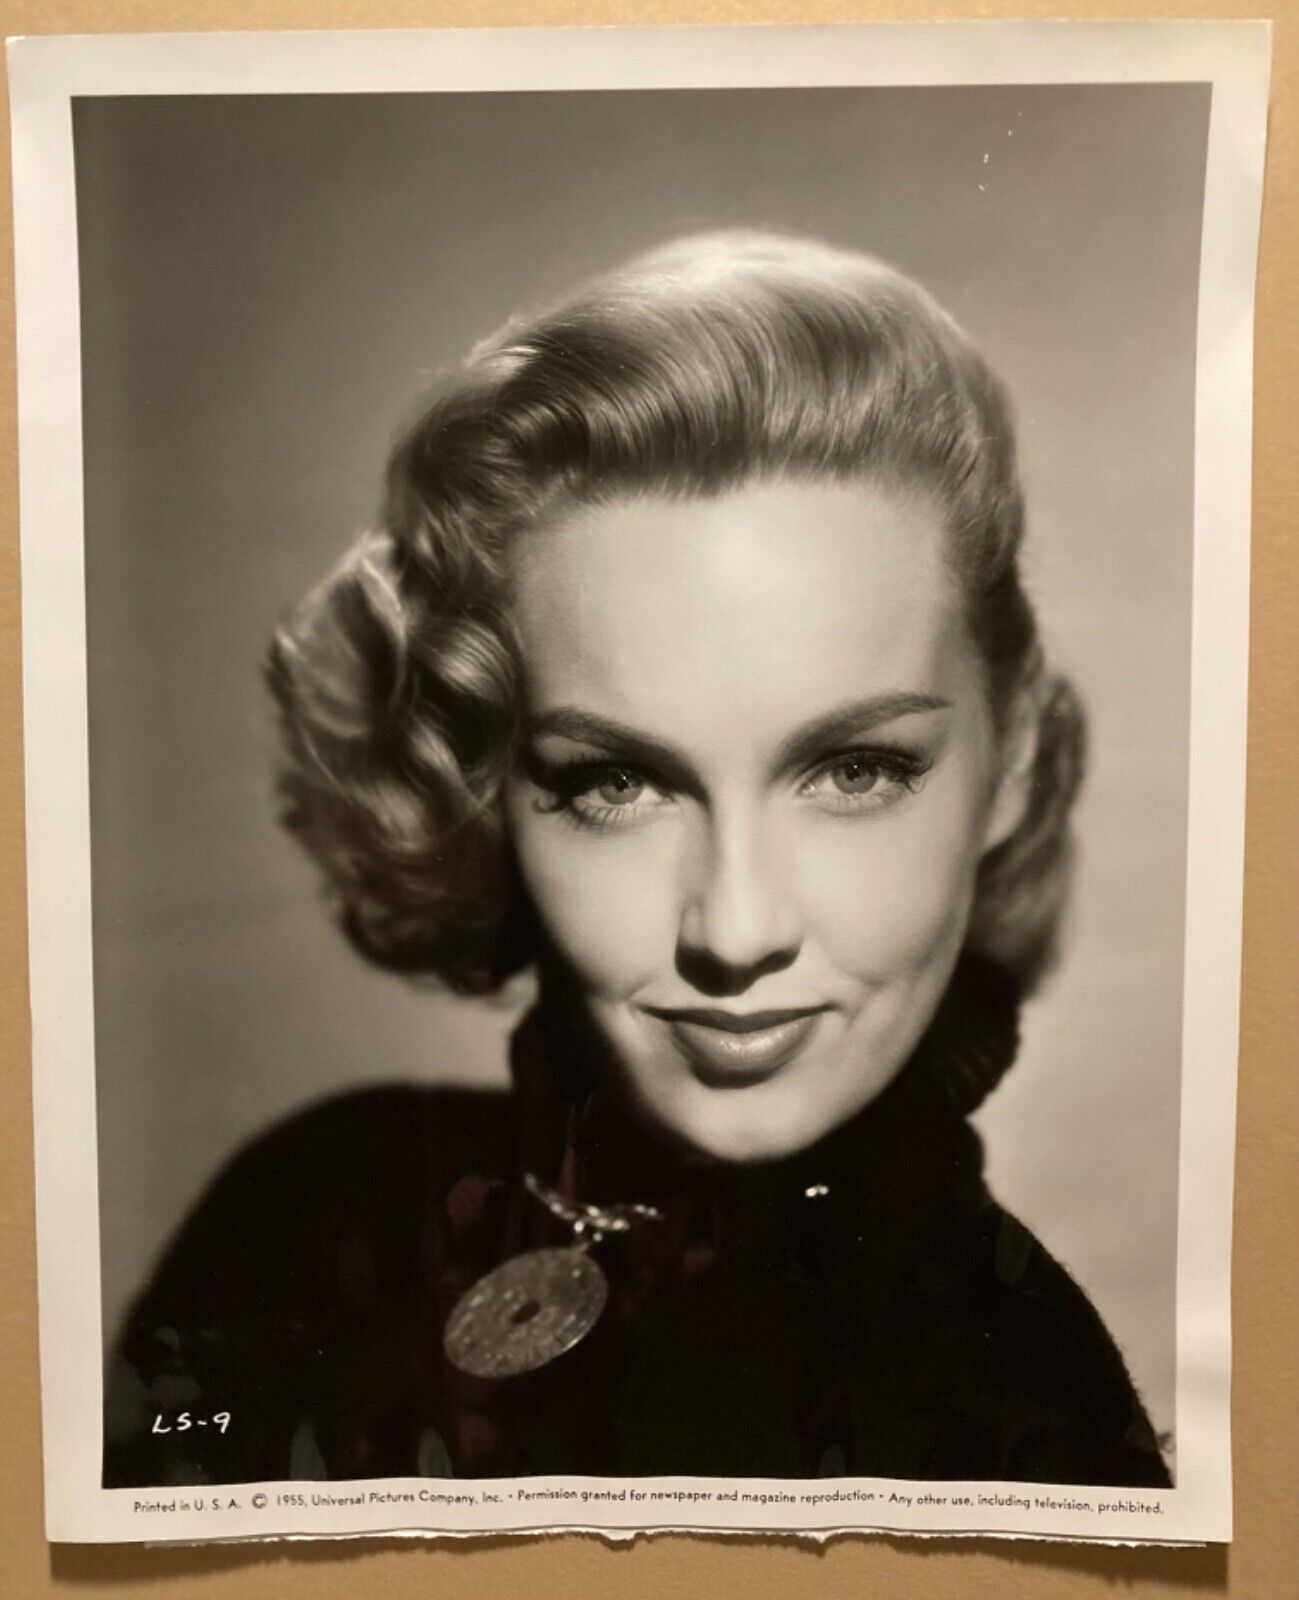 Hollywood pinup photo of actress Leigh Snowden 1955 portrait “Outside the Law”